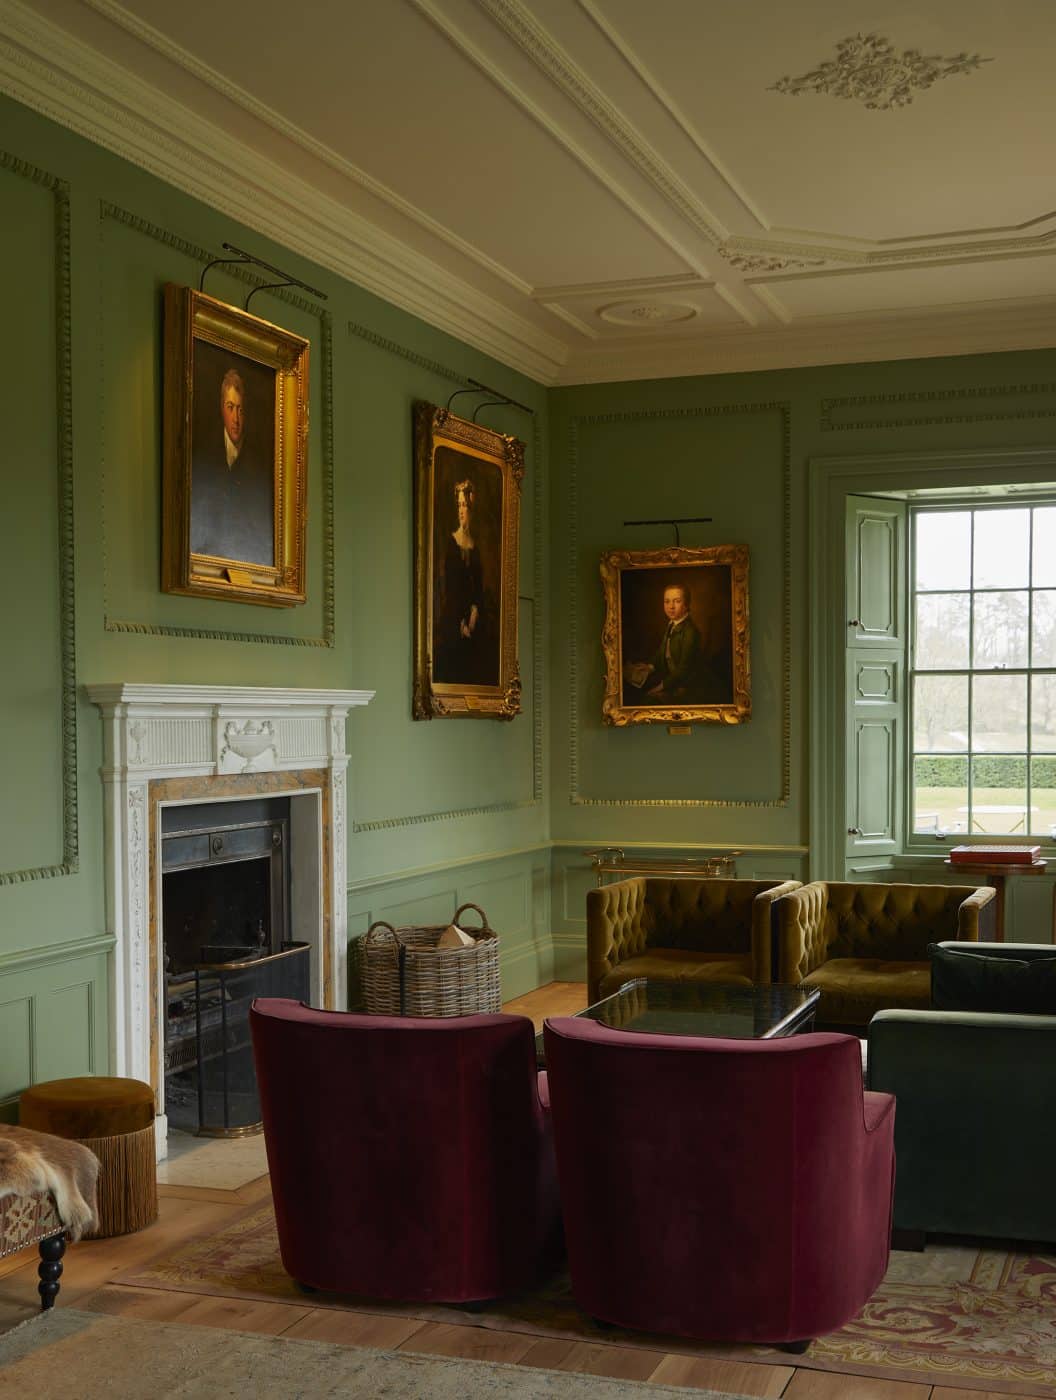 The drawing room of the Farmyard's Georgian-style Hapsden House at the Newt